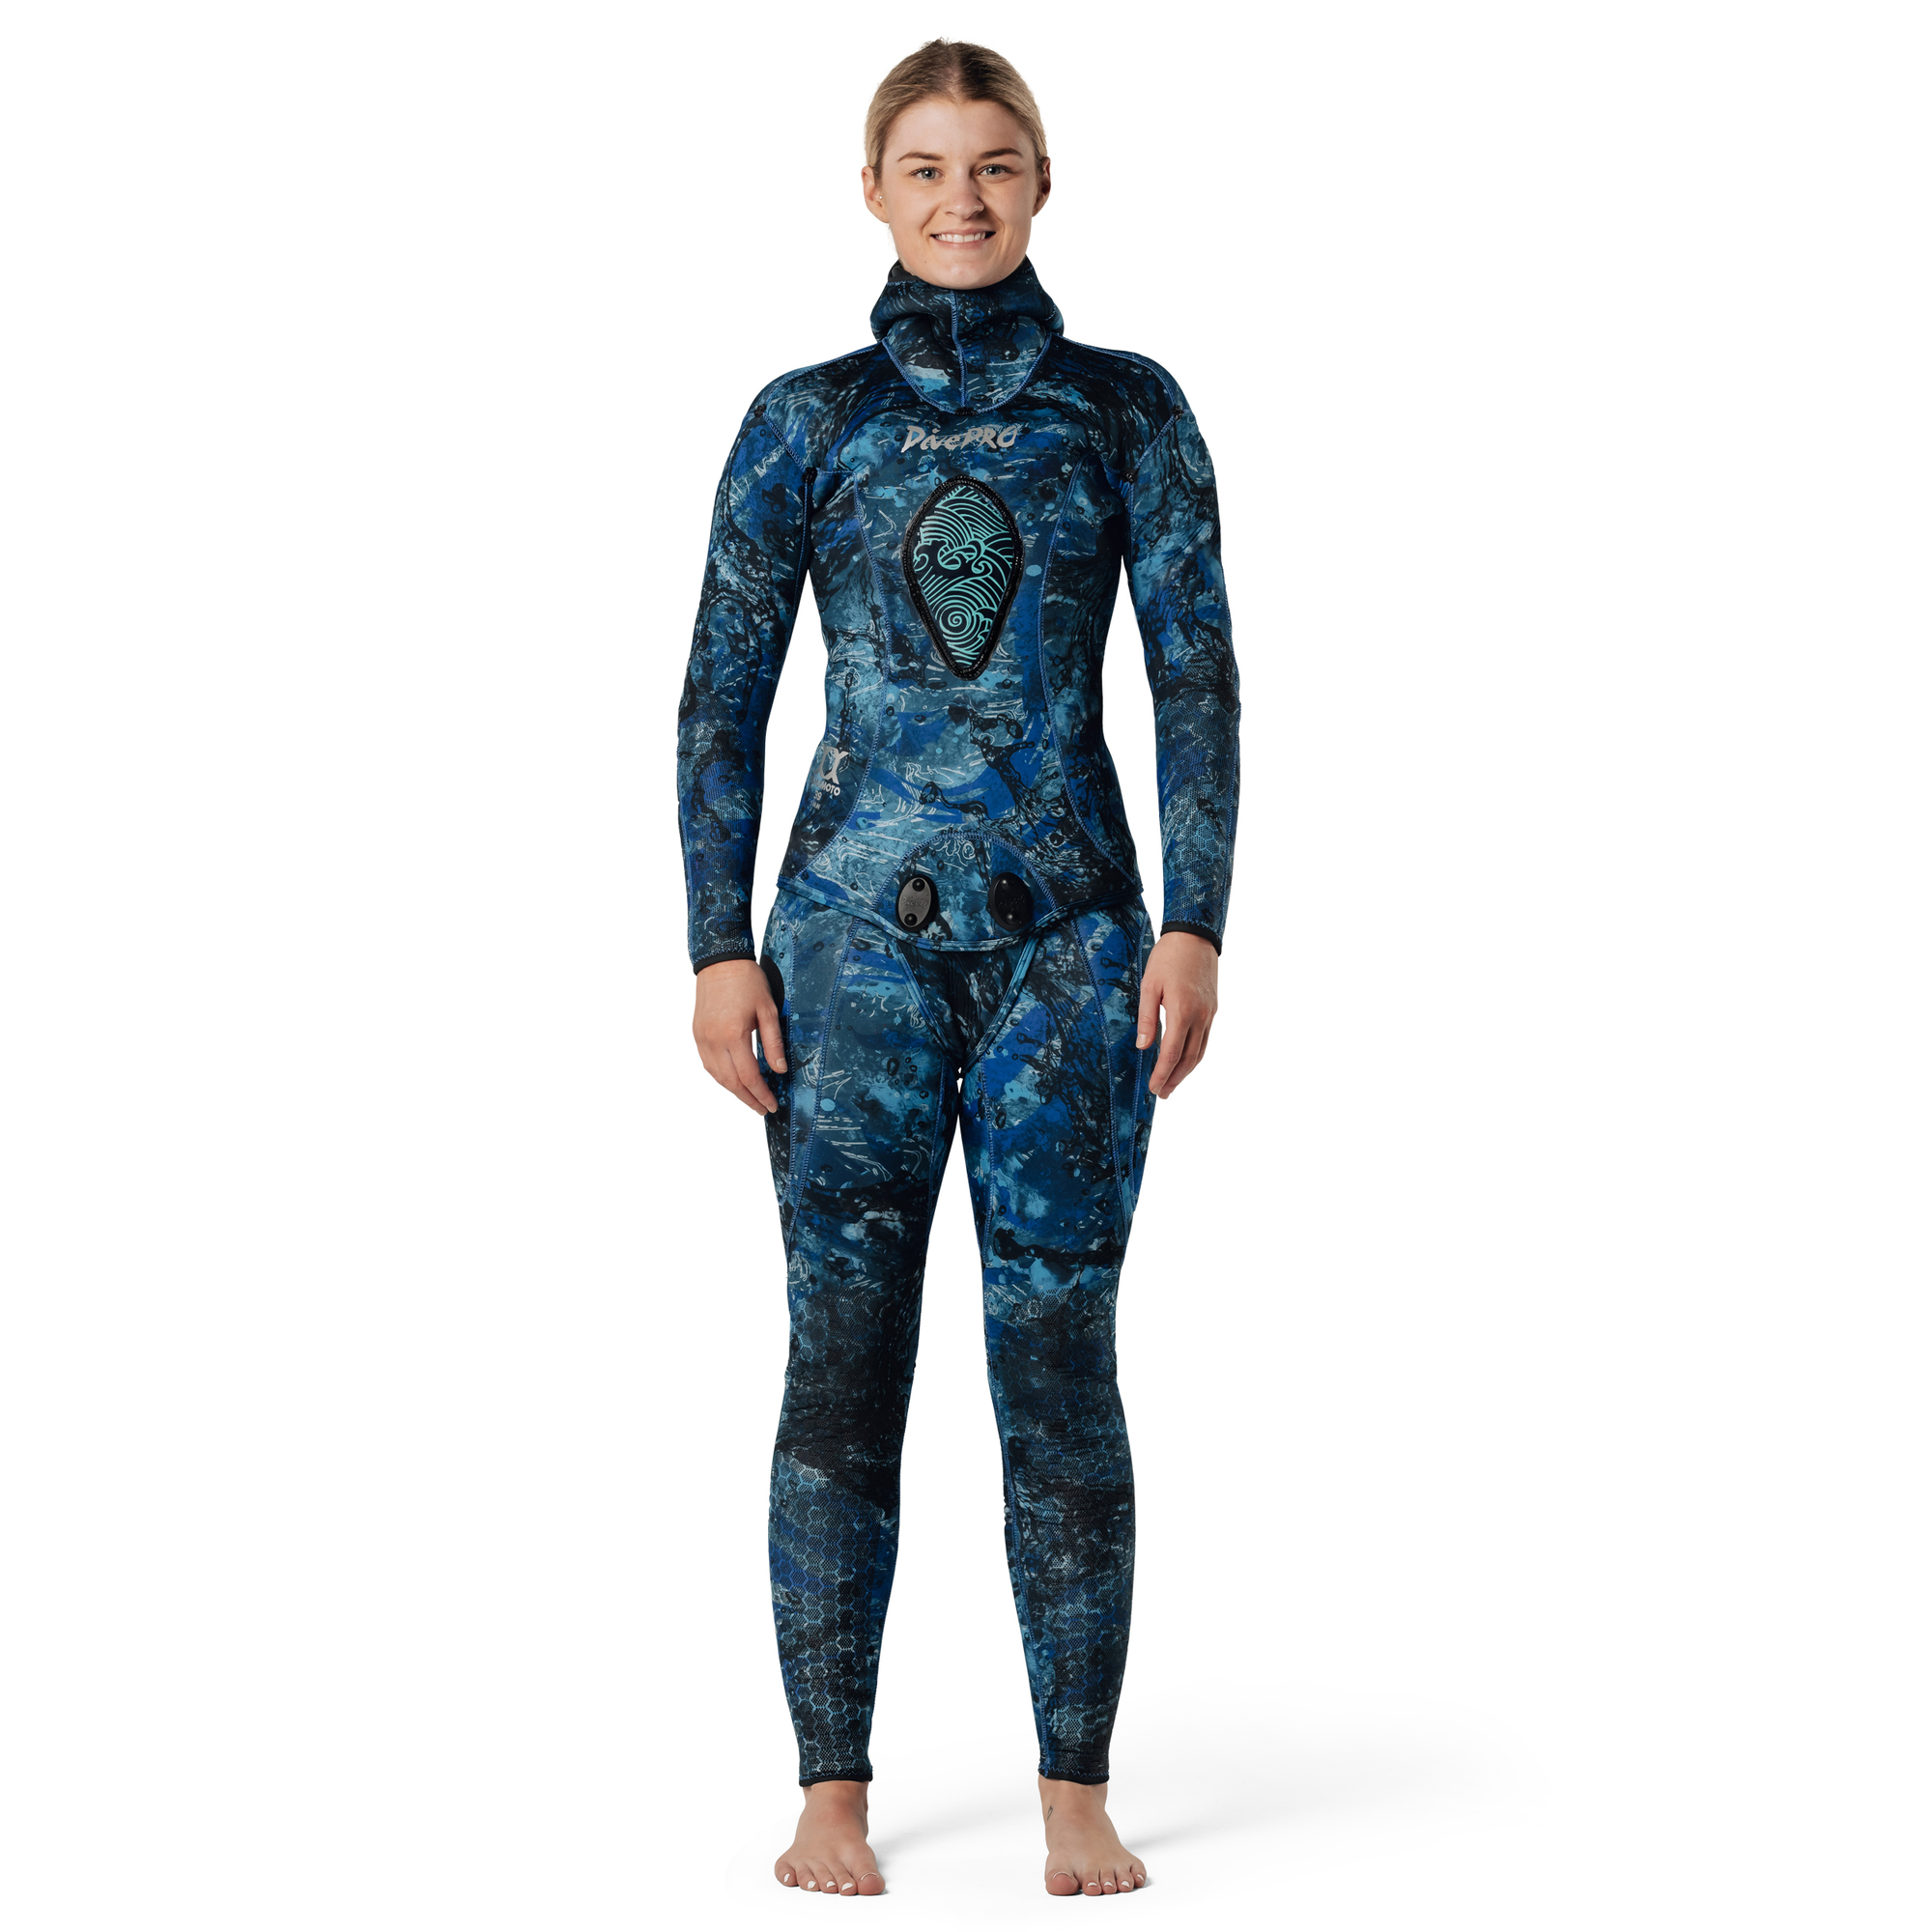 DivePRO Opencell Wetsuit DEVIL YAMAMOTO 39 3mm